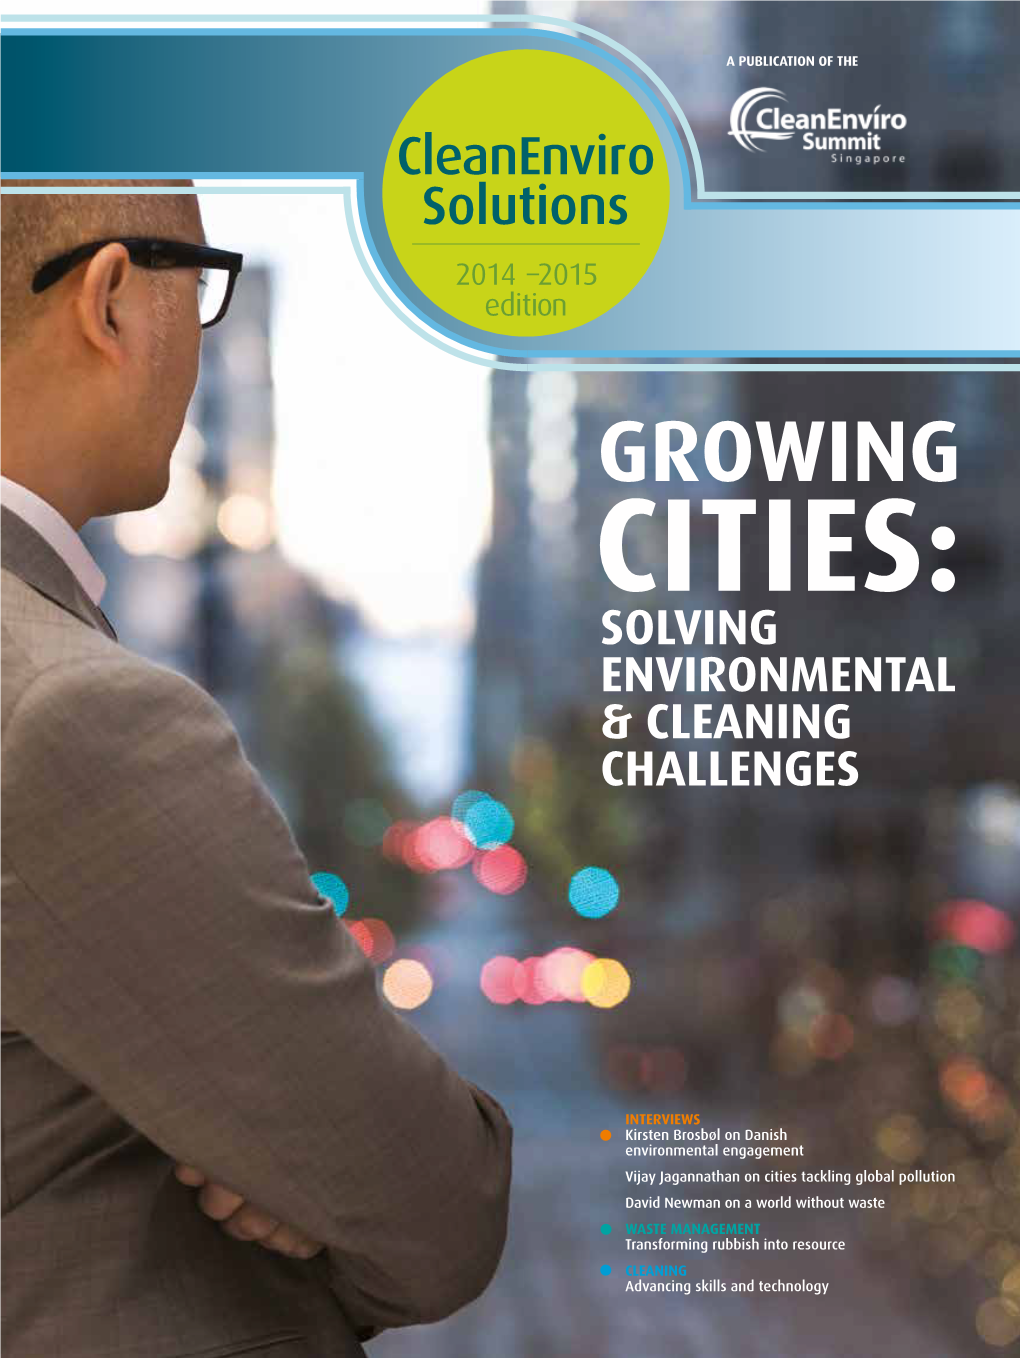 GROWING CITIES: Solving Environmental & Cleaning Challenges